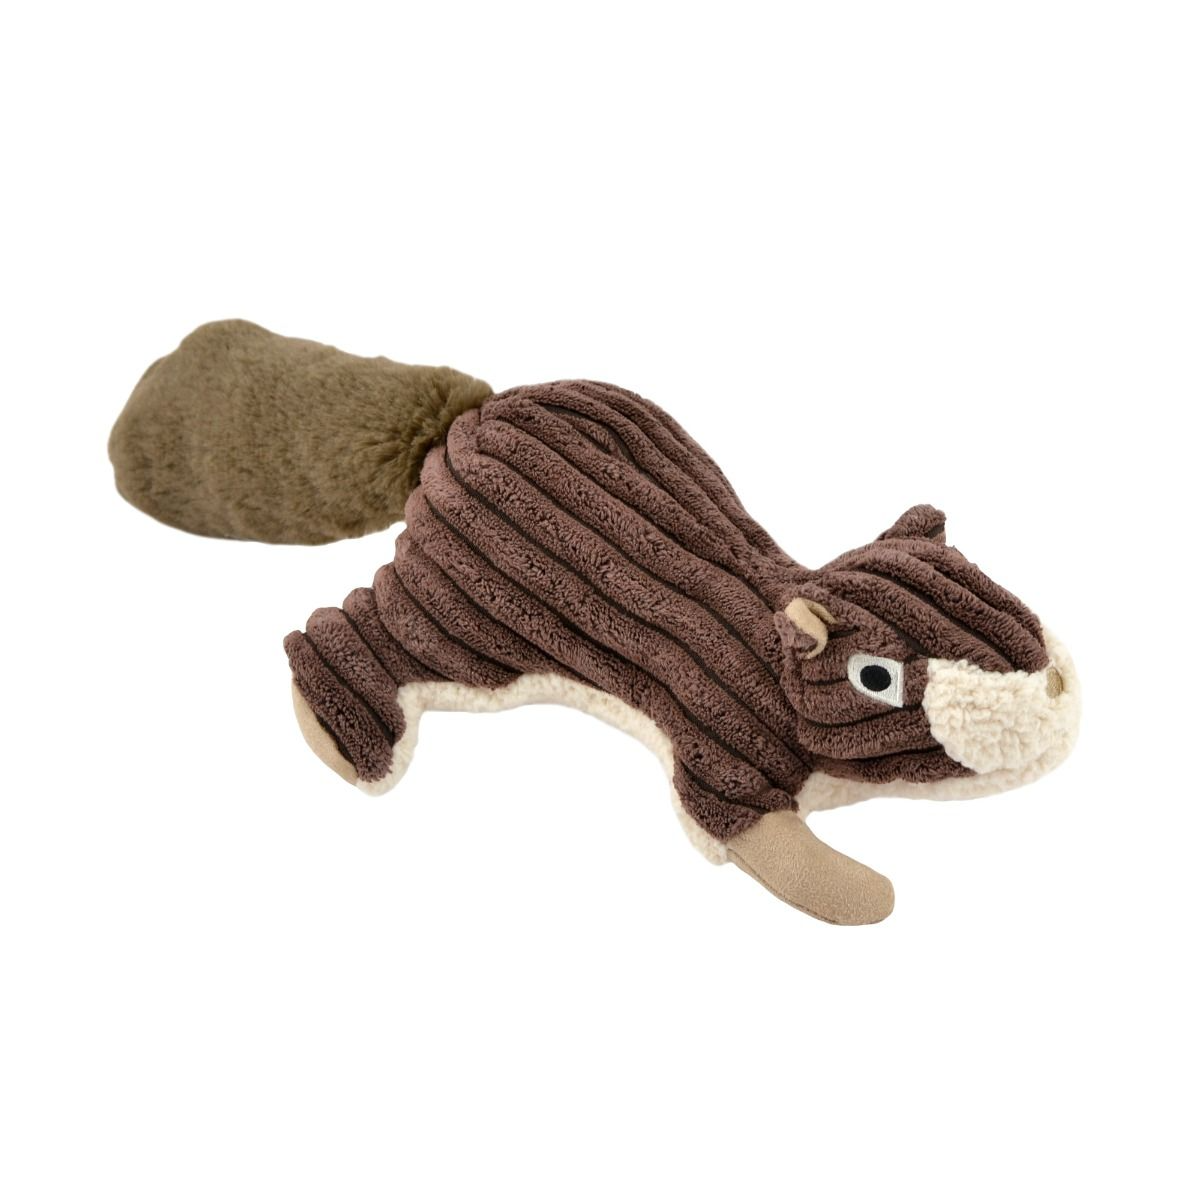 Plush Squirrel Dog Toy With Squeaker - 12-in - Mellow Monkey